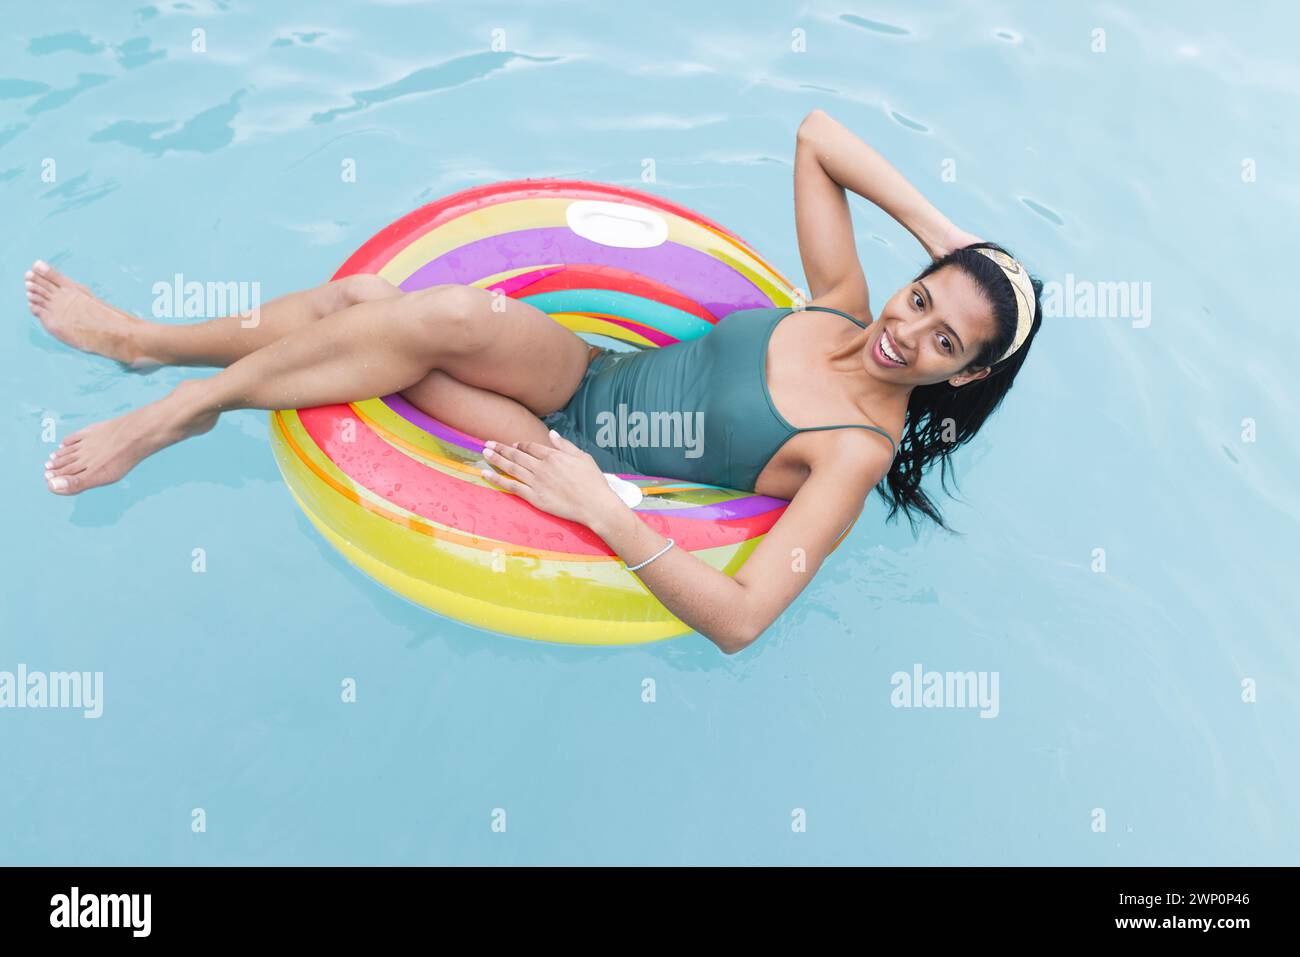 Young biracial woman lounges on a colorful pool float, her dark hair tied back Stock Photo